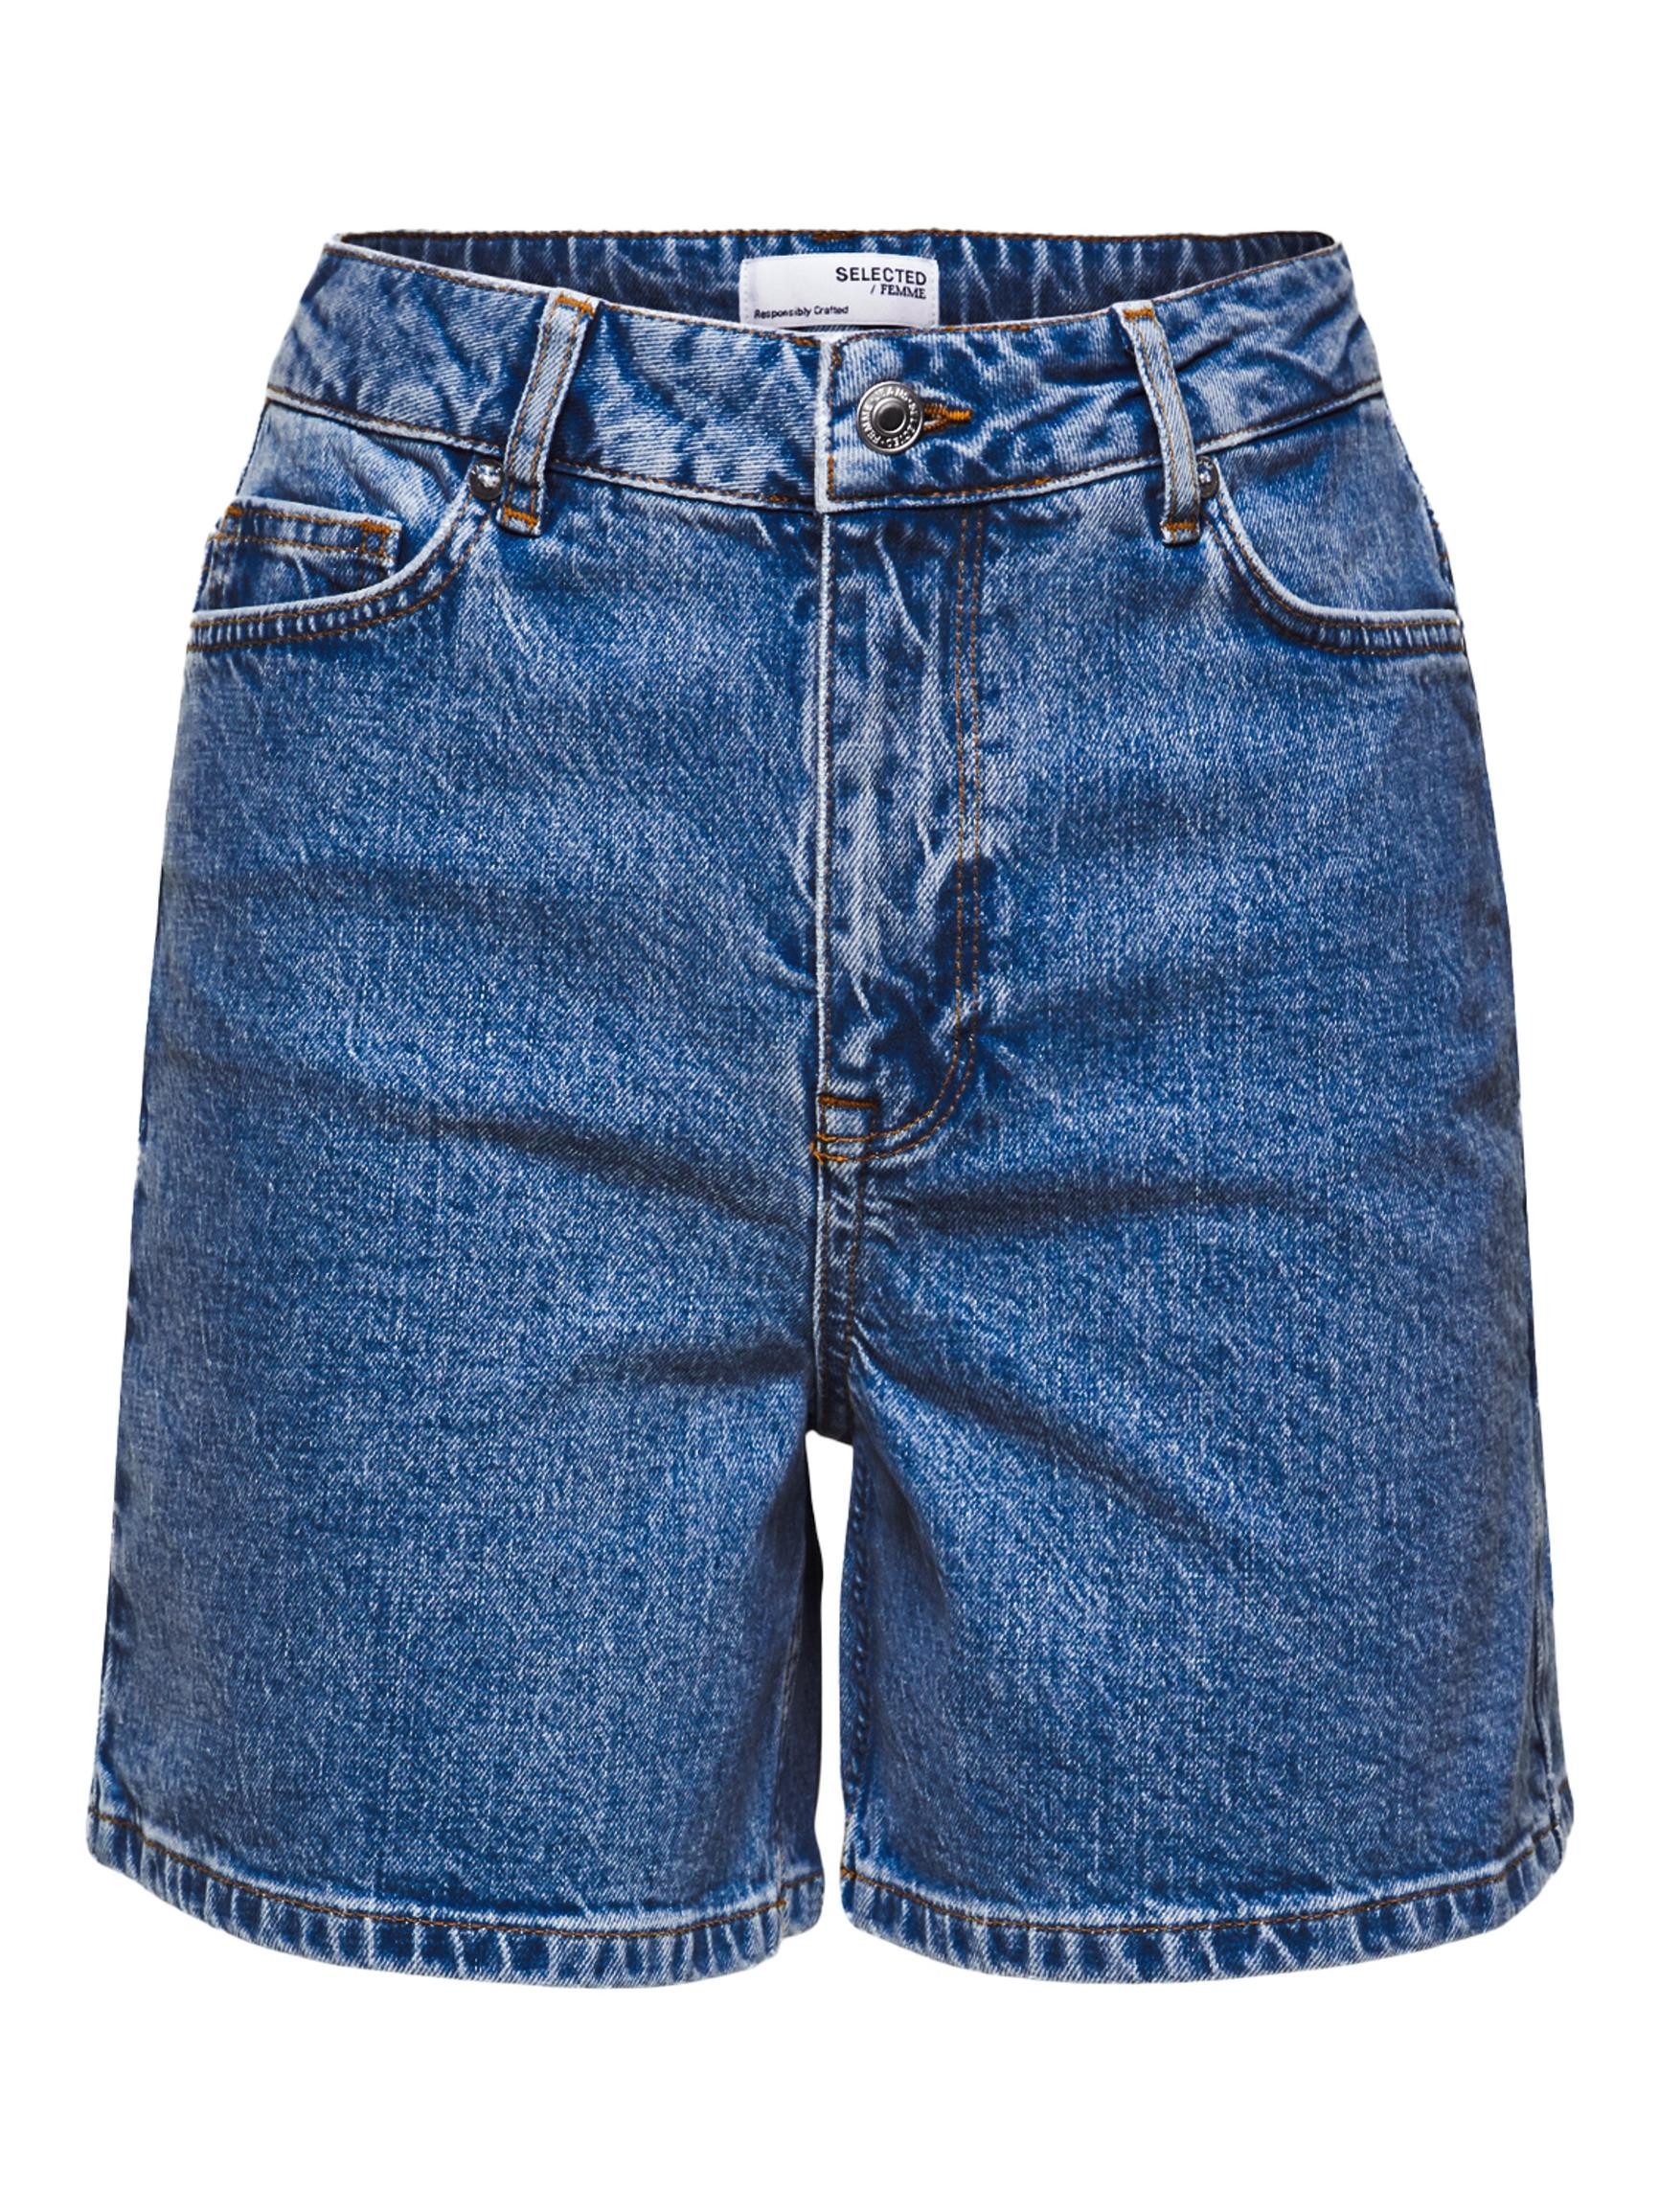 SELECTED FEMME Jeansshorts